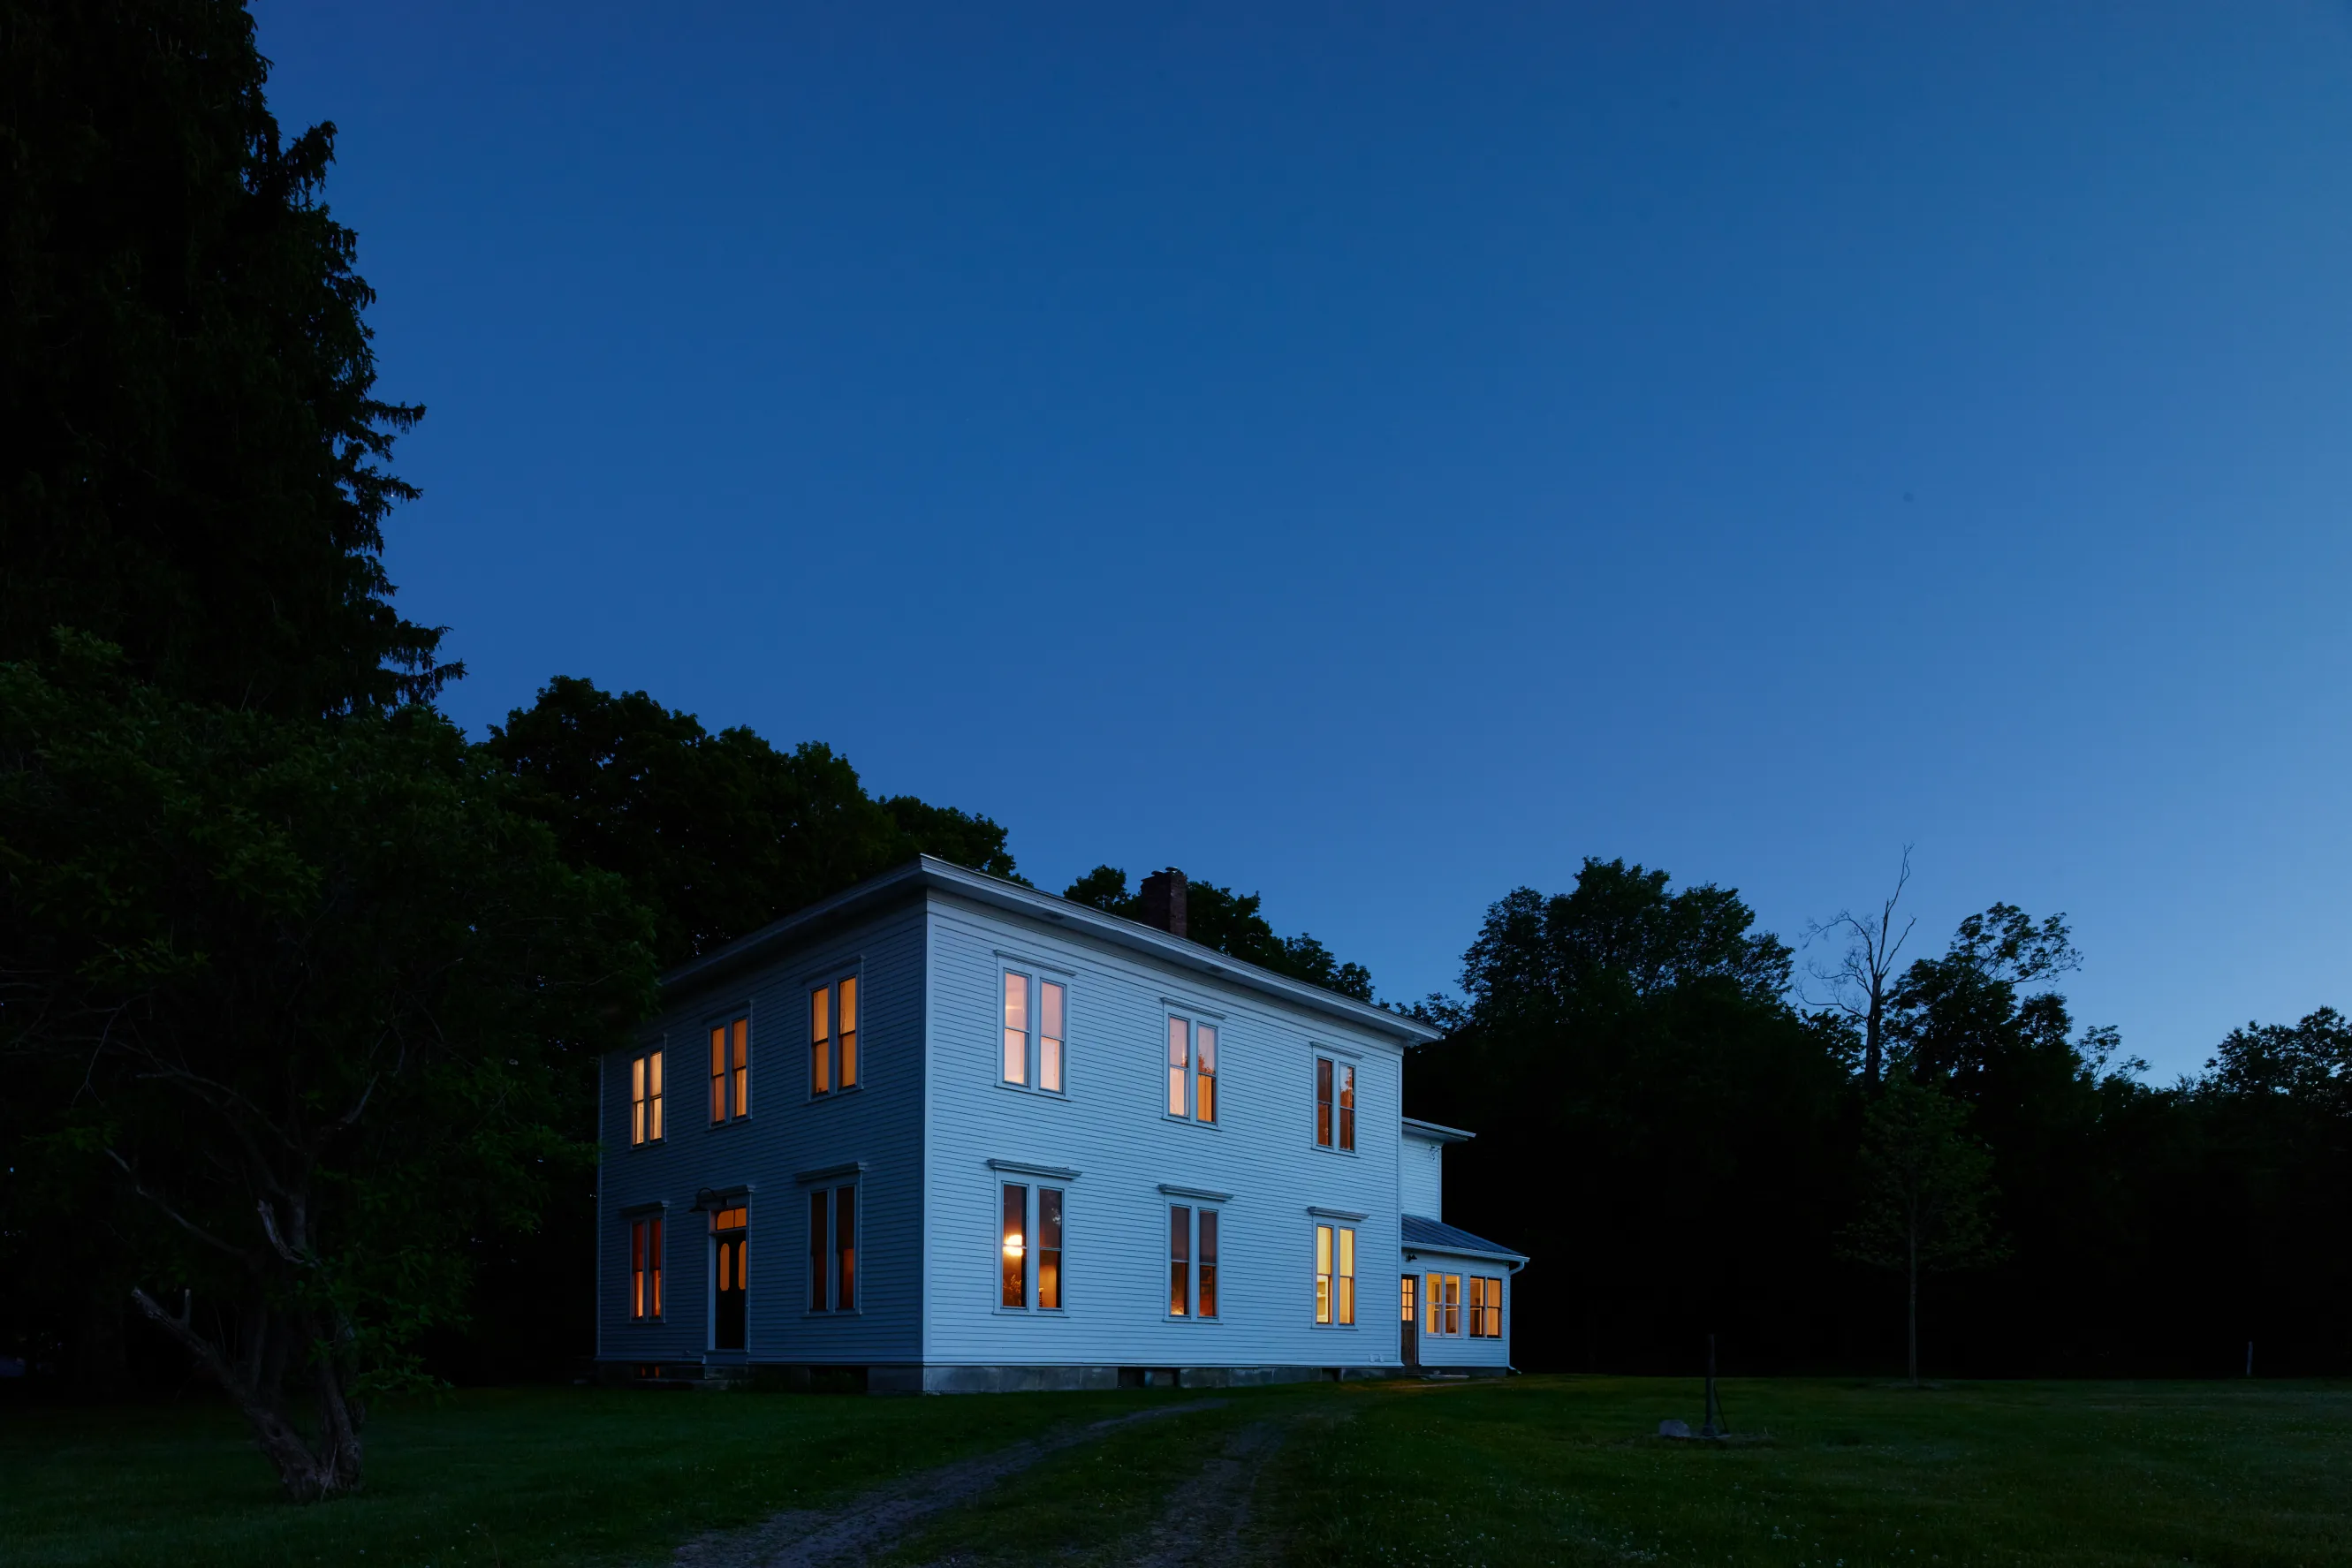 A night shot of a clear blue sky and a white two-story home in the center, surrounded by trees.